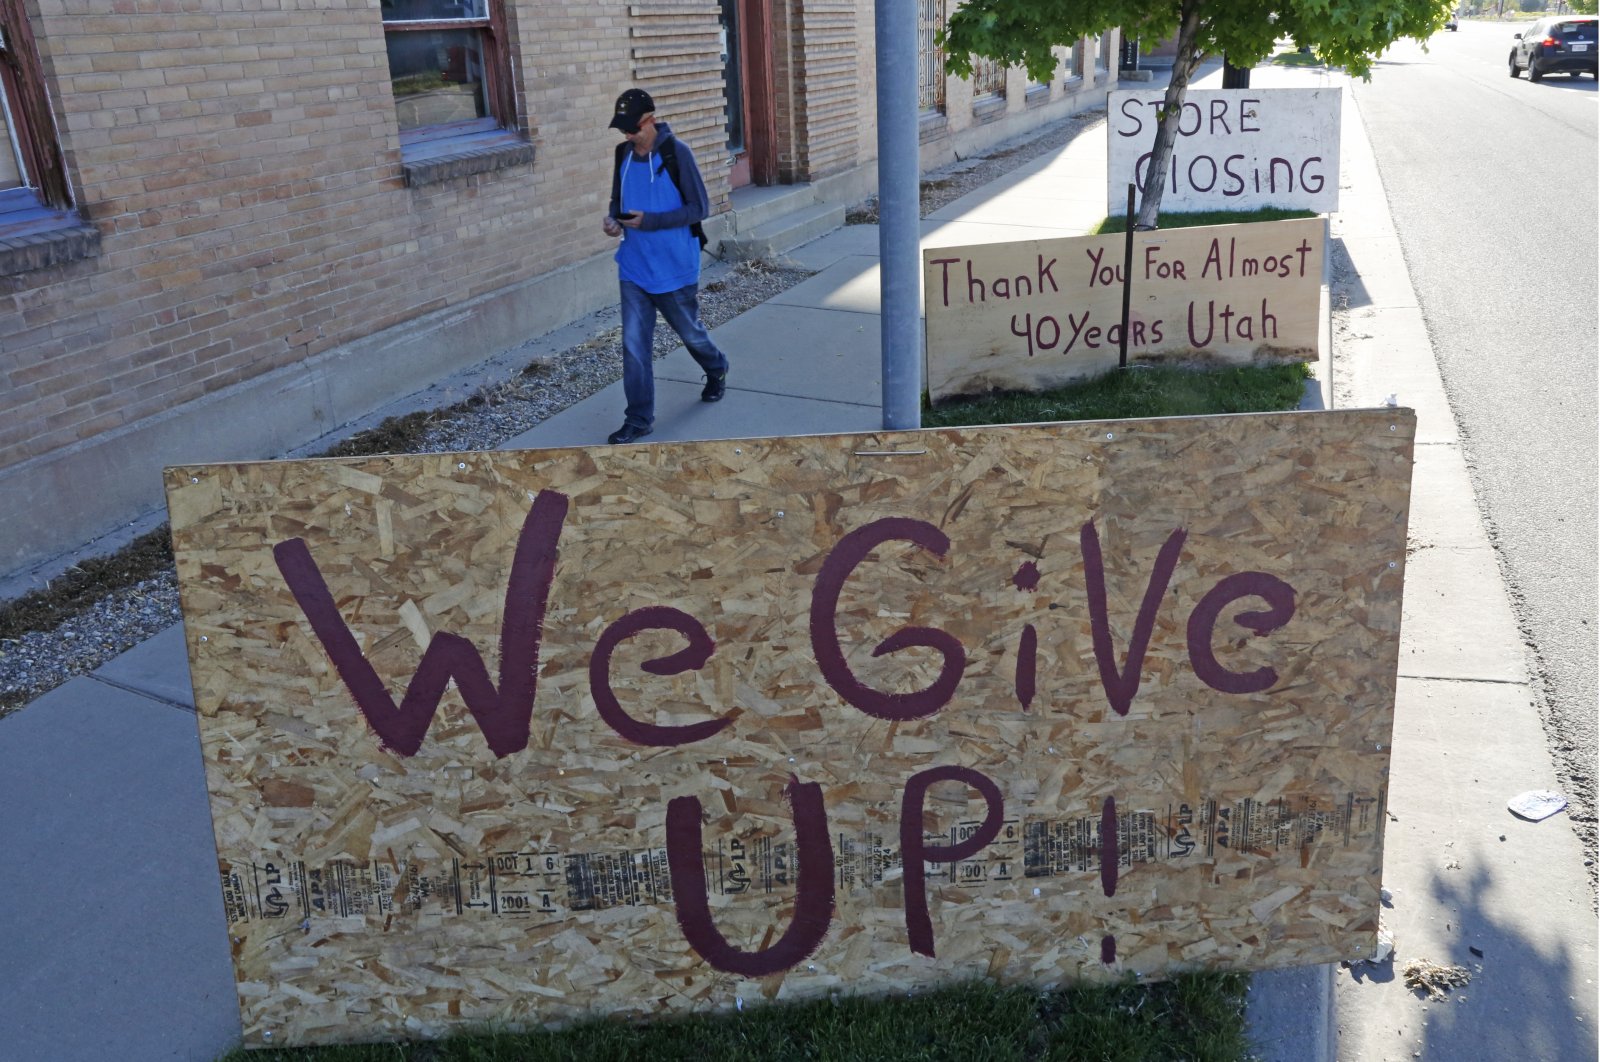 A man walks past a "We Give Up" sign outside Euro Treasures Antiques Friday, Salt Lake City, U.S., May 8, 2020. Owner Scott Evans is closing his art and antique store after 40 years. (AP Photo)